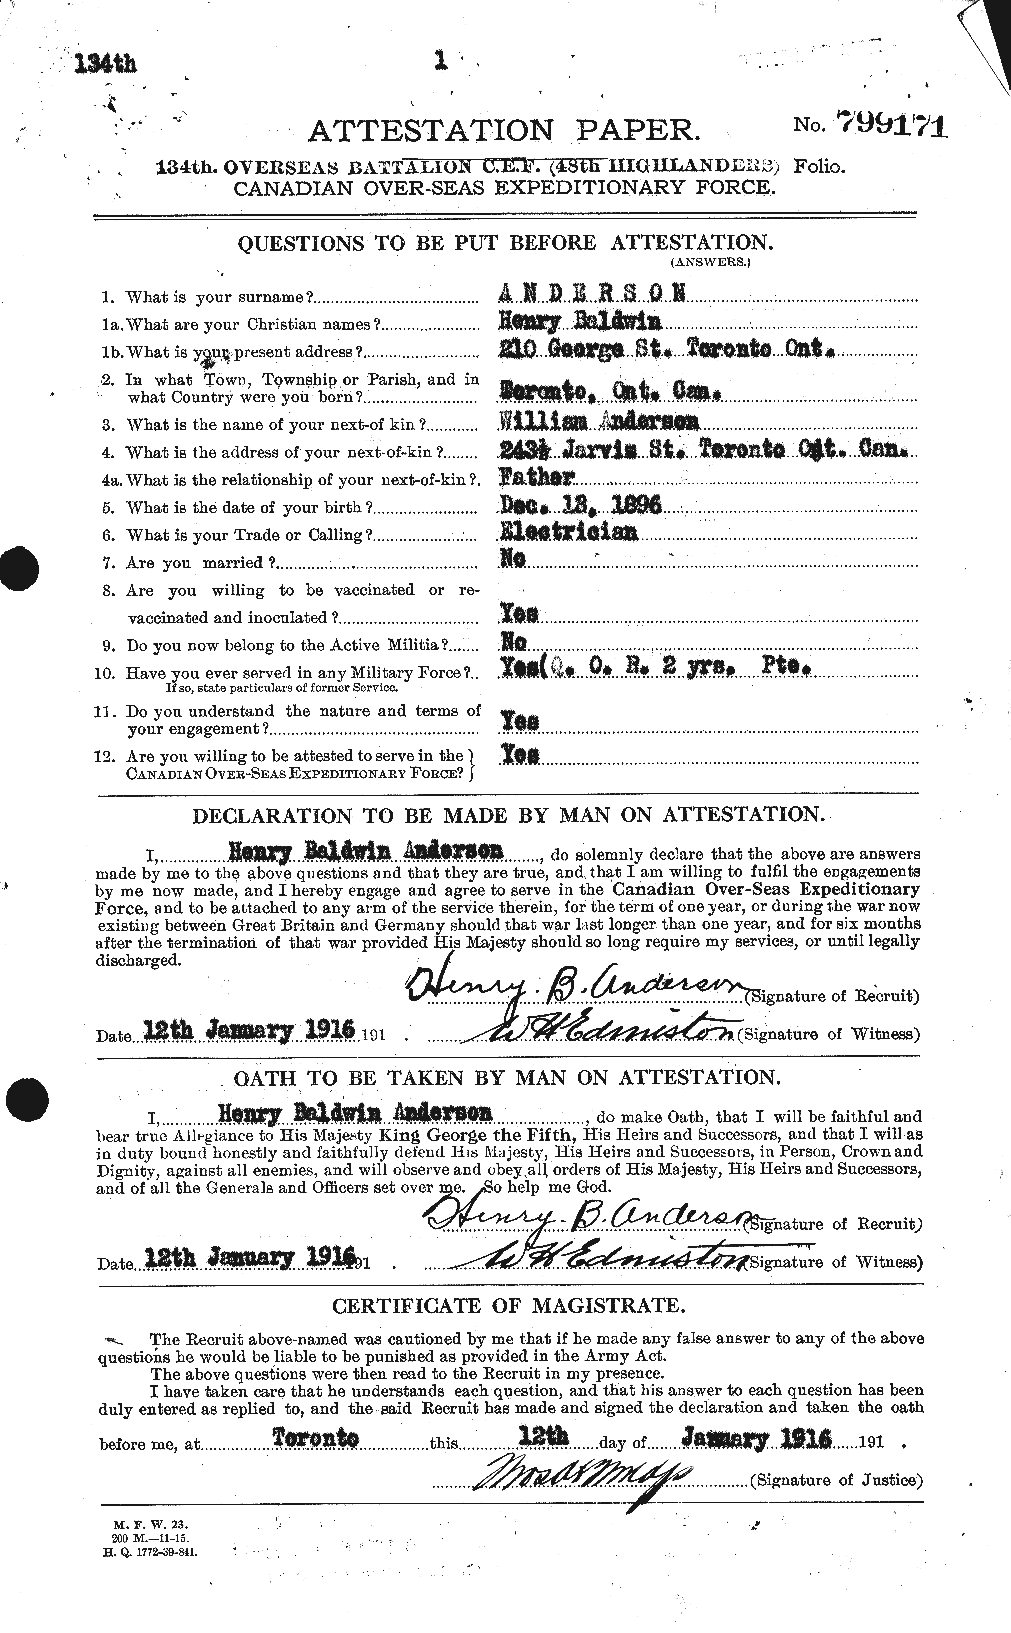 Personnel Records of the First World War - CEF 207994a